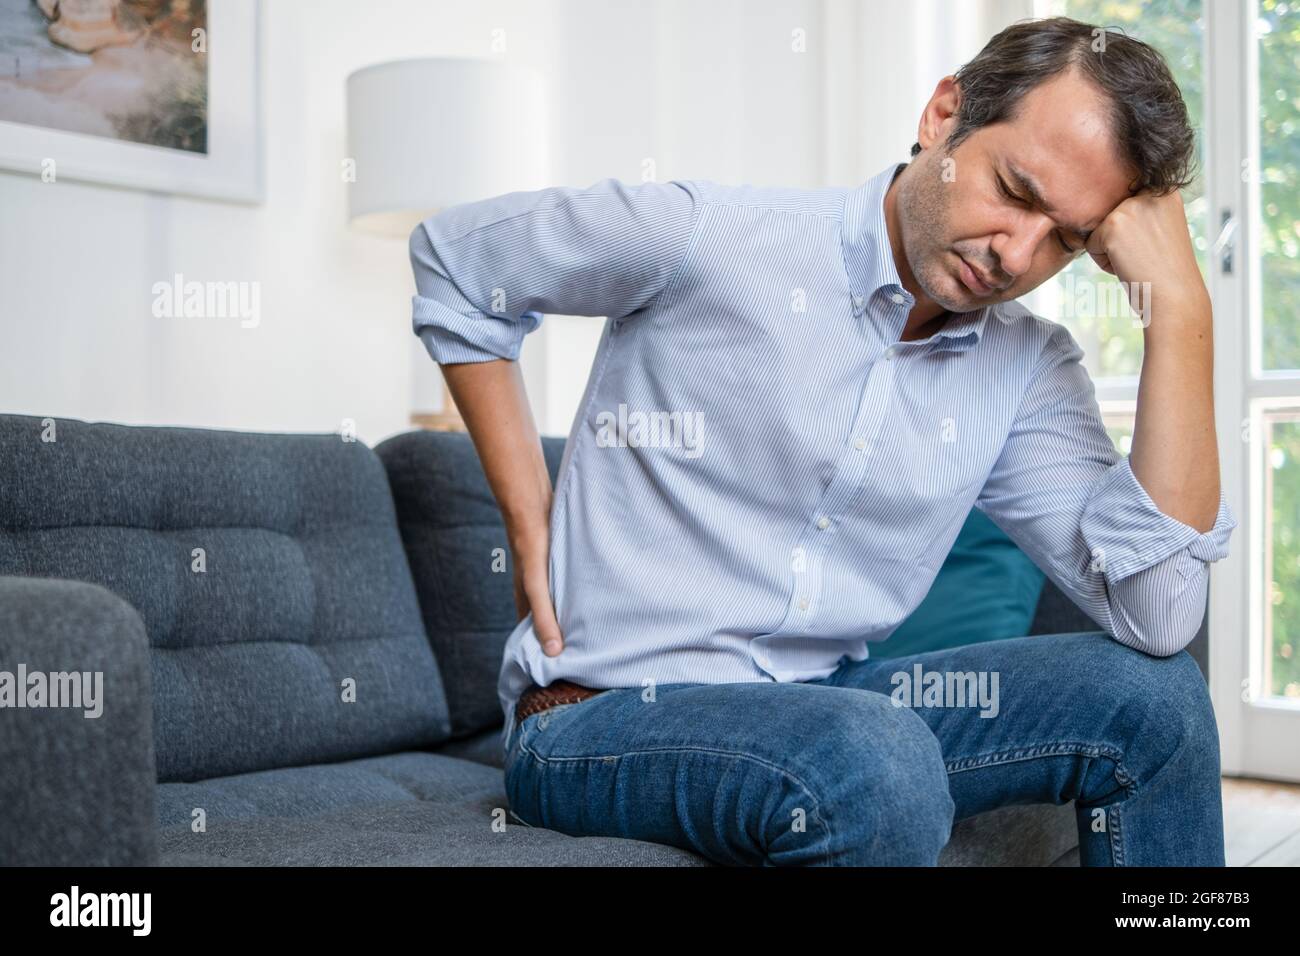 The masseur makes a relaxing massage of the trapezius muscles and back to  the client lying on the couch Stock Photo - Alamy